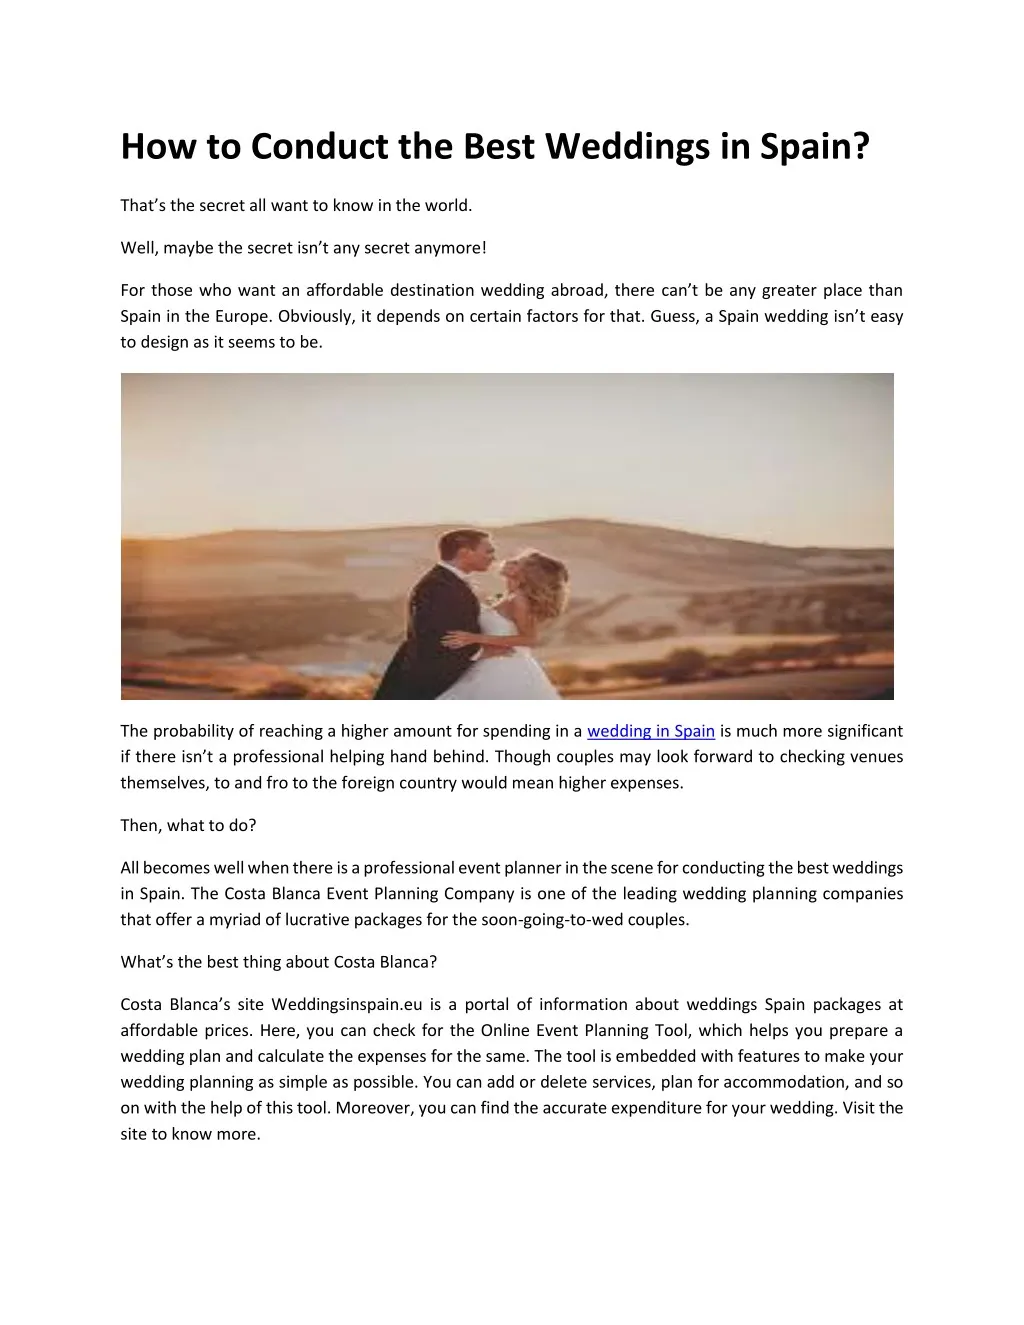 how to conduct the best weddings in spain